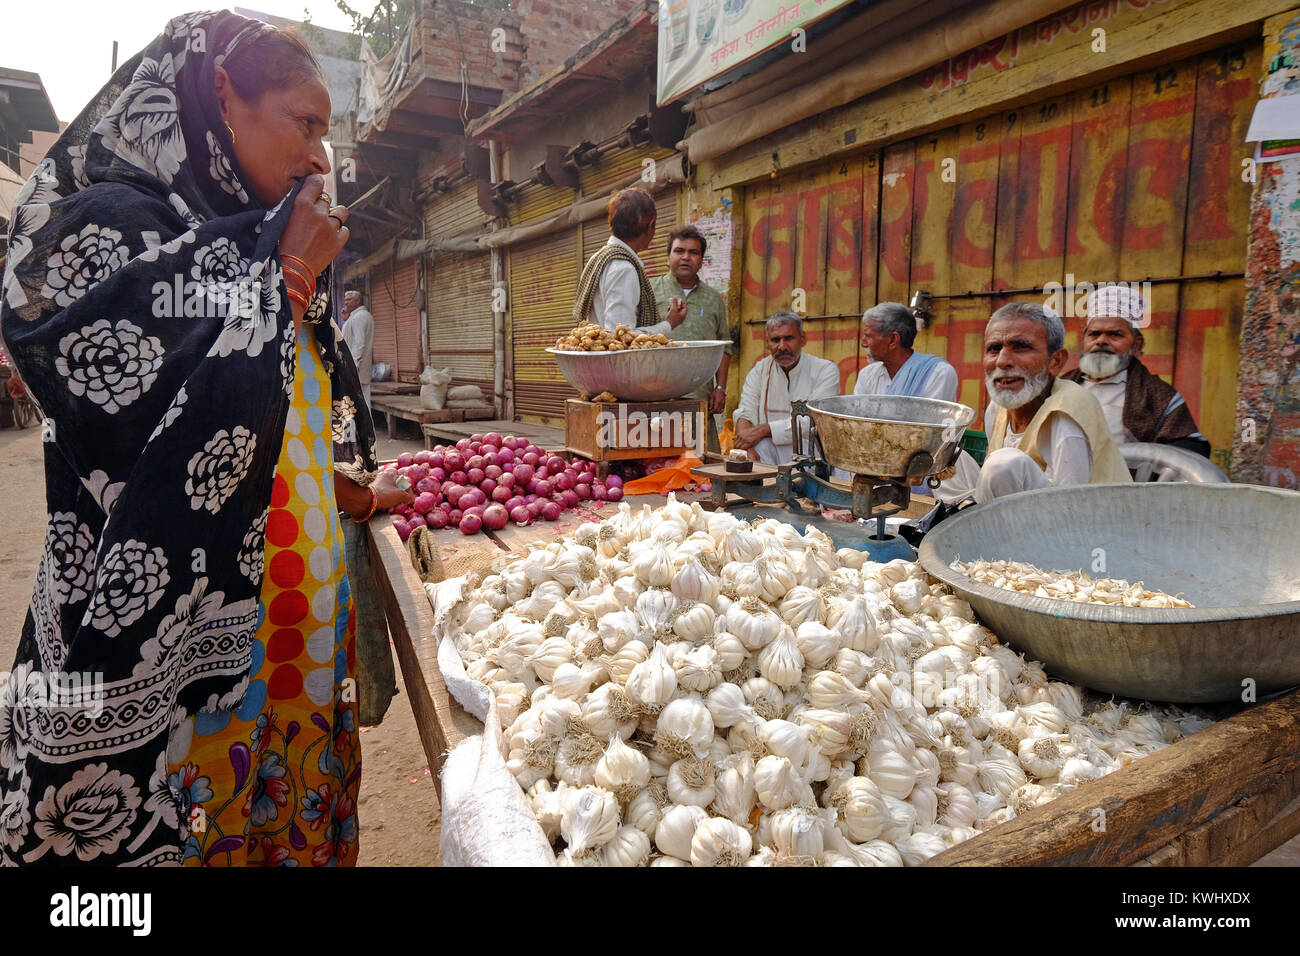 Garlic and onions for sale on a cart at an Indian street market Stock Photo